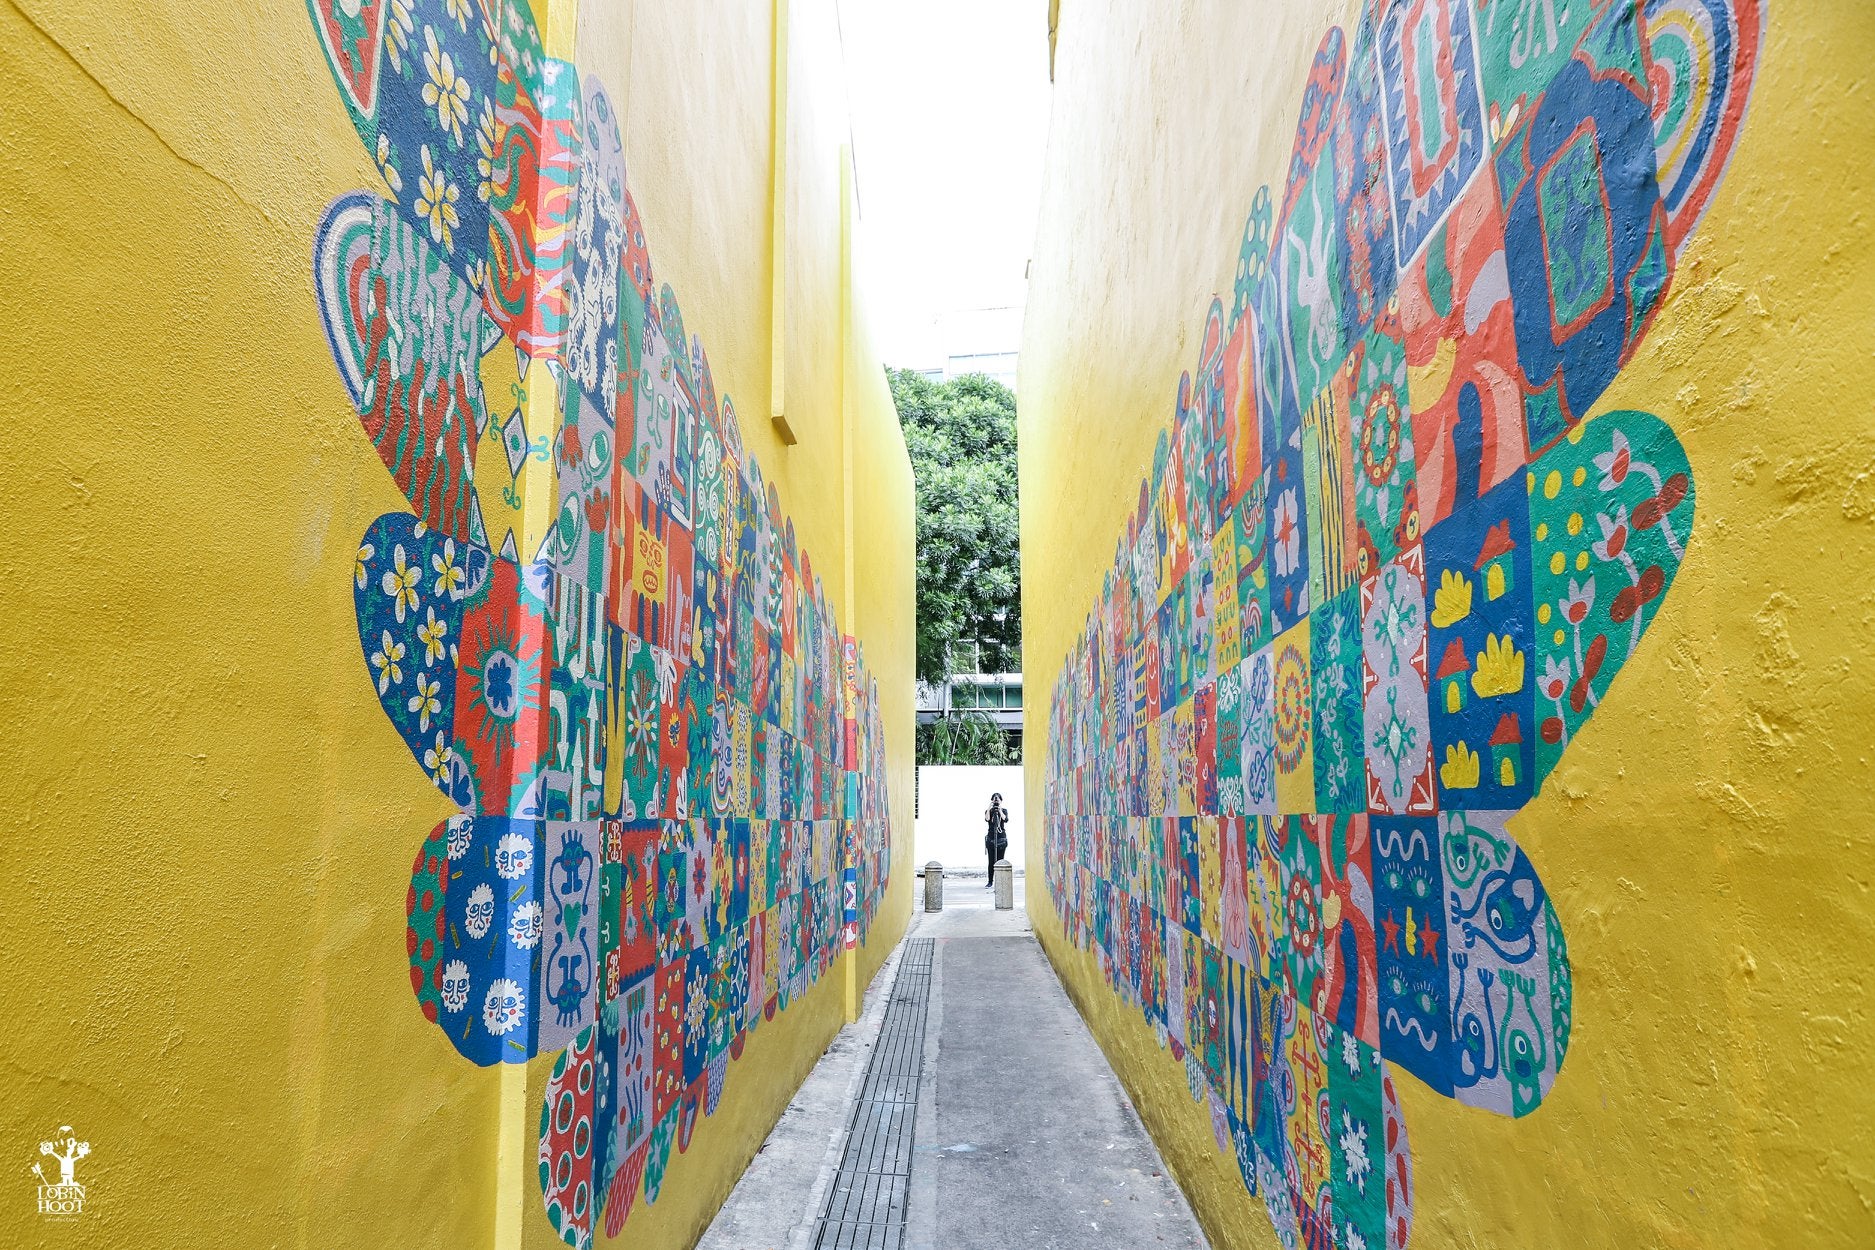 Catch some instant culture with a stroll around Singapore’s stunning street art